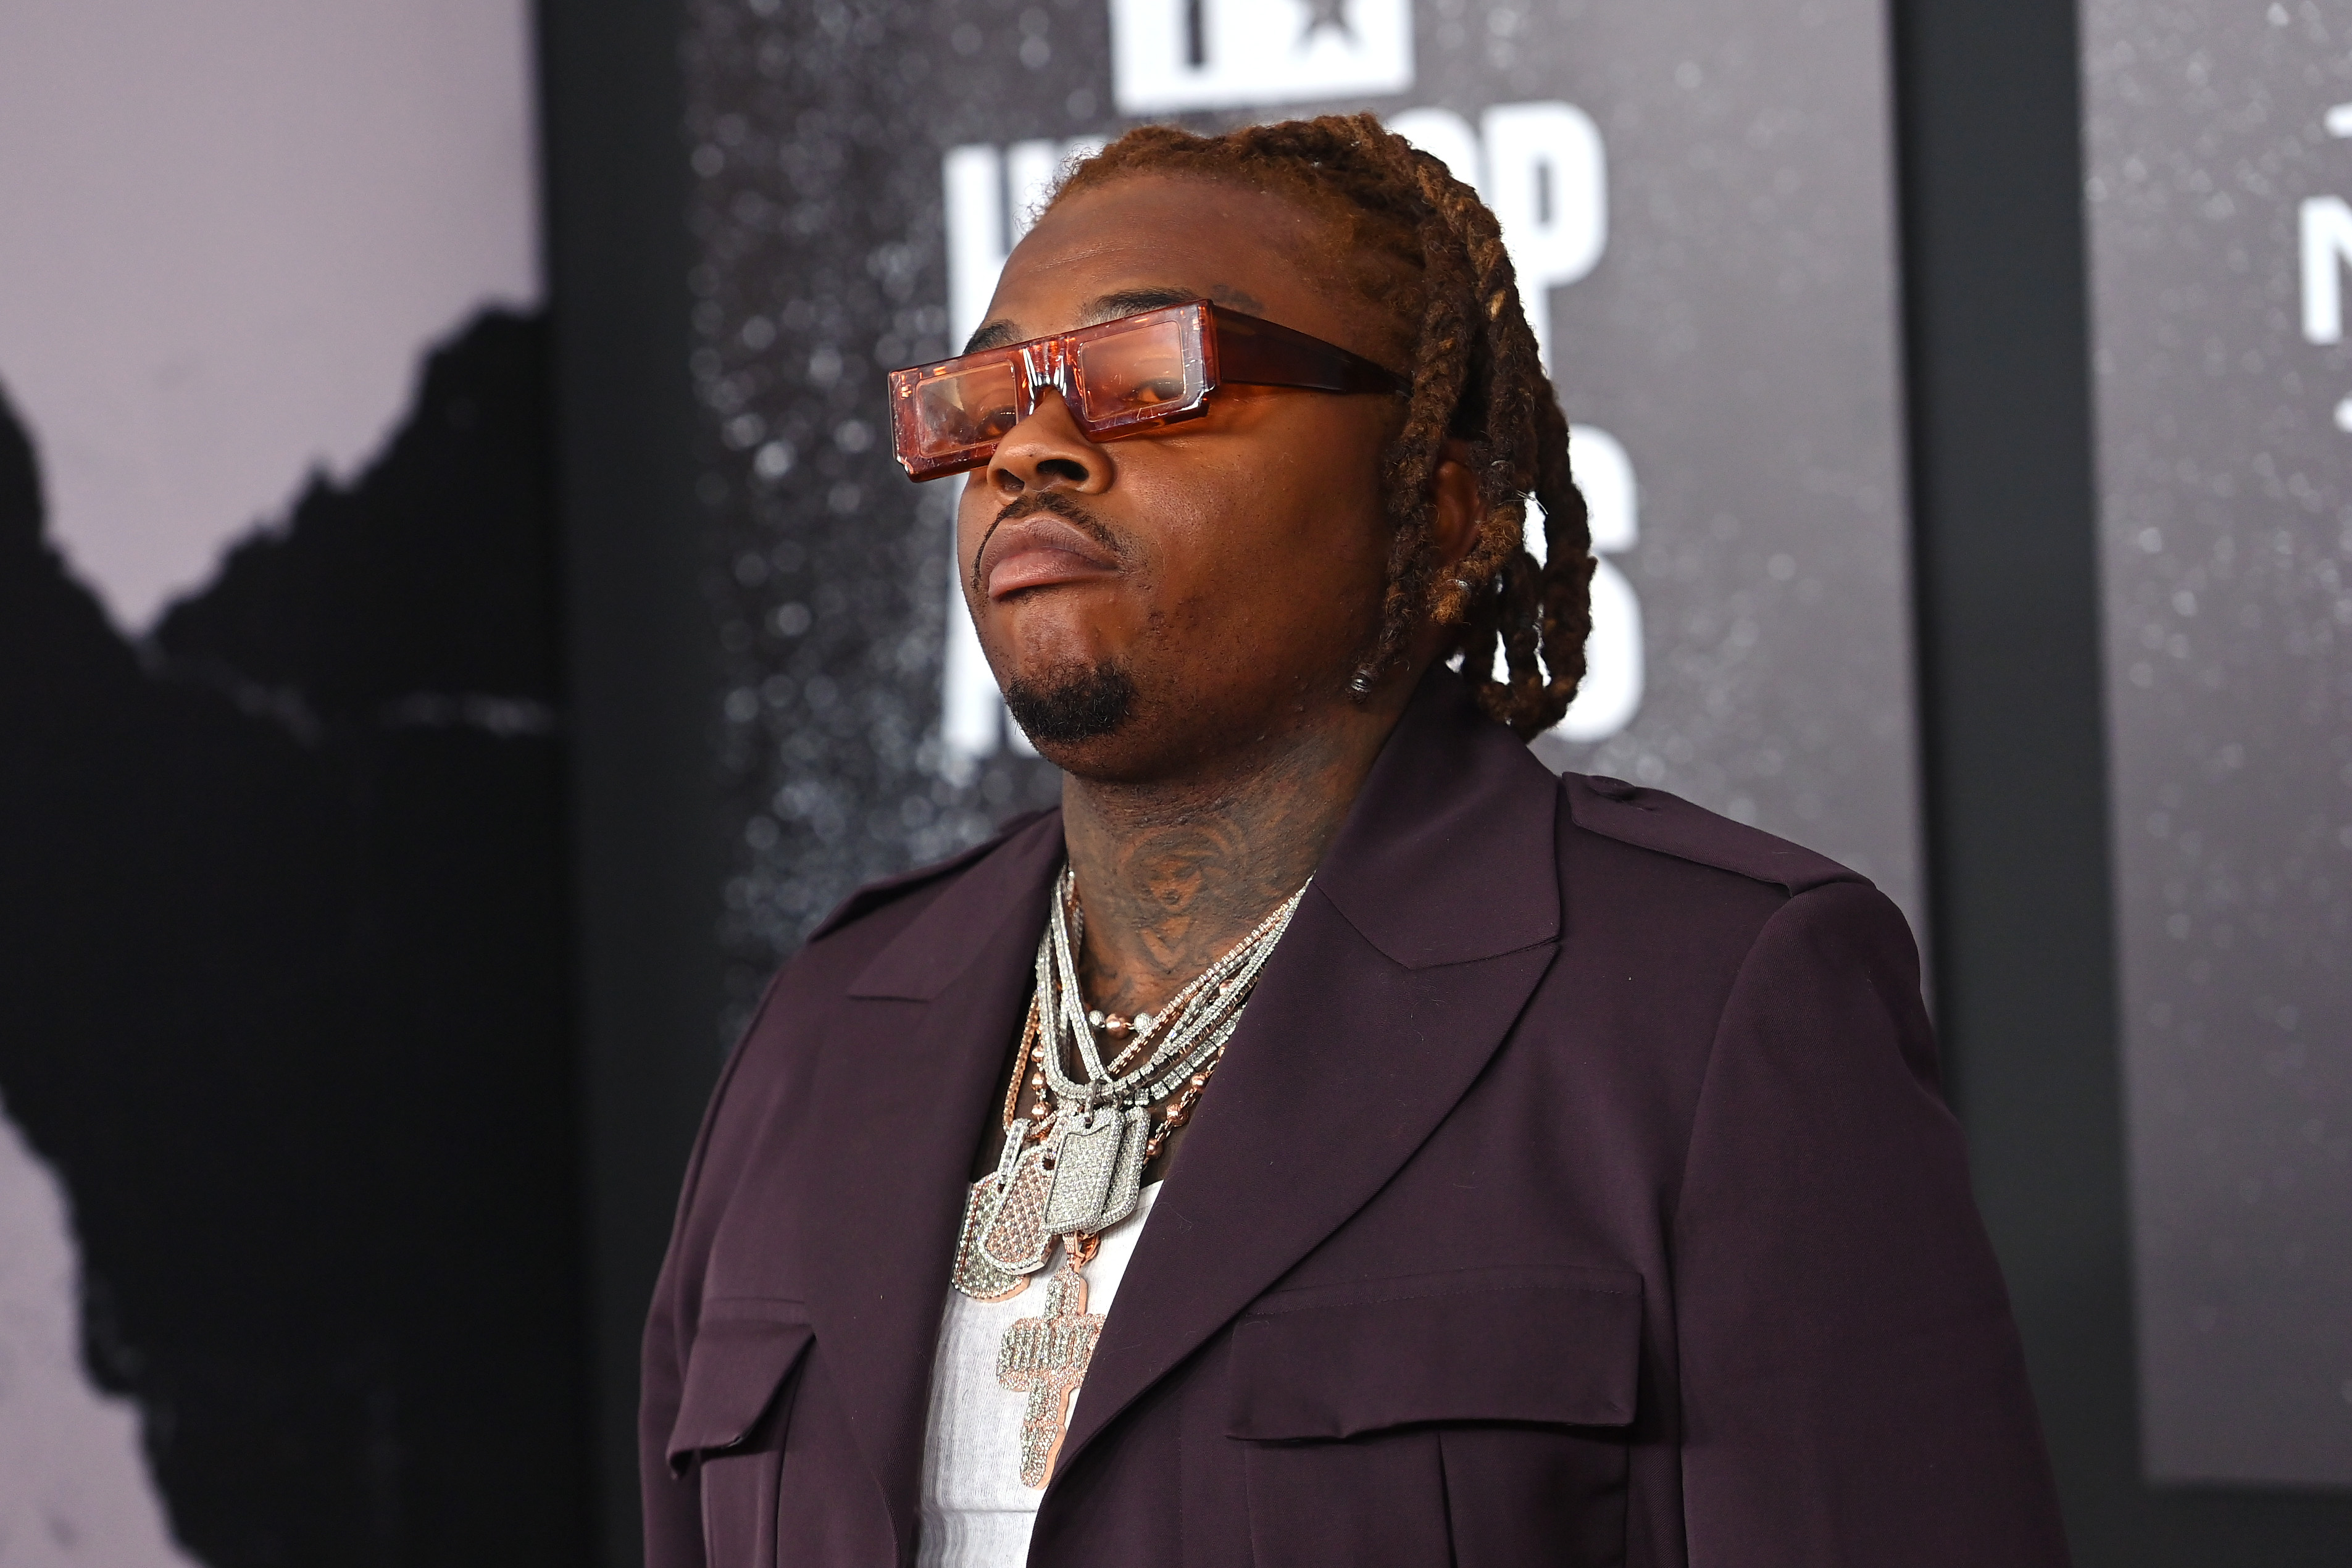 Gunna Denies Being Involved In Crypto Scam, Says He Was Hacked